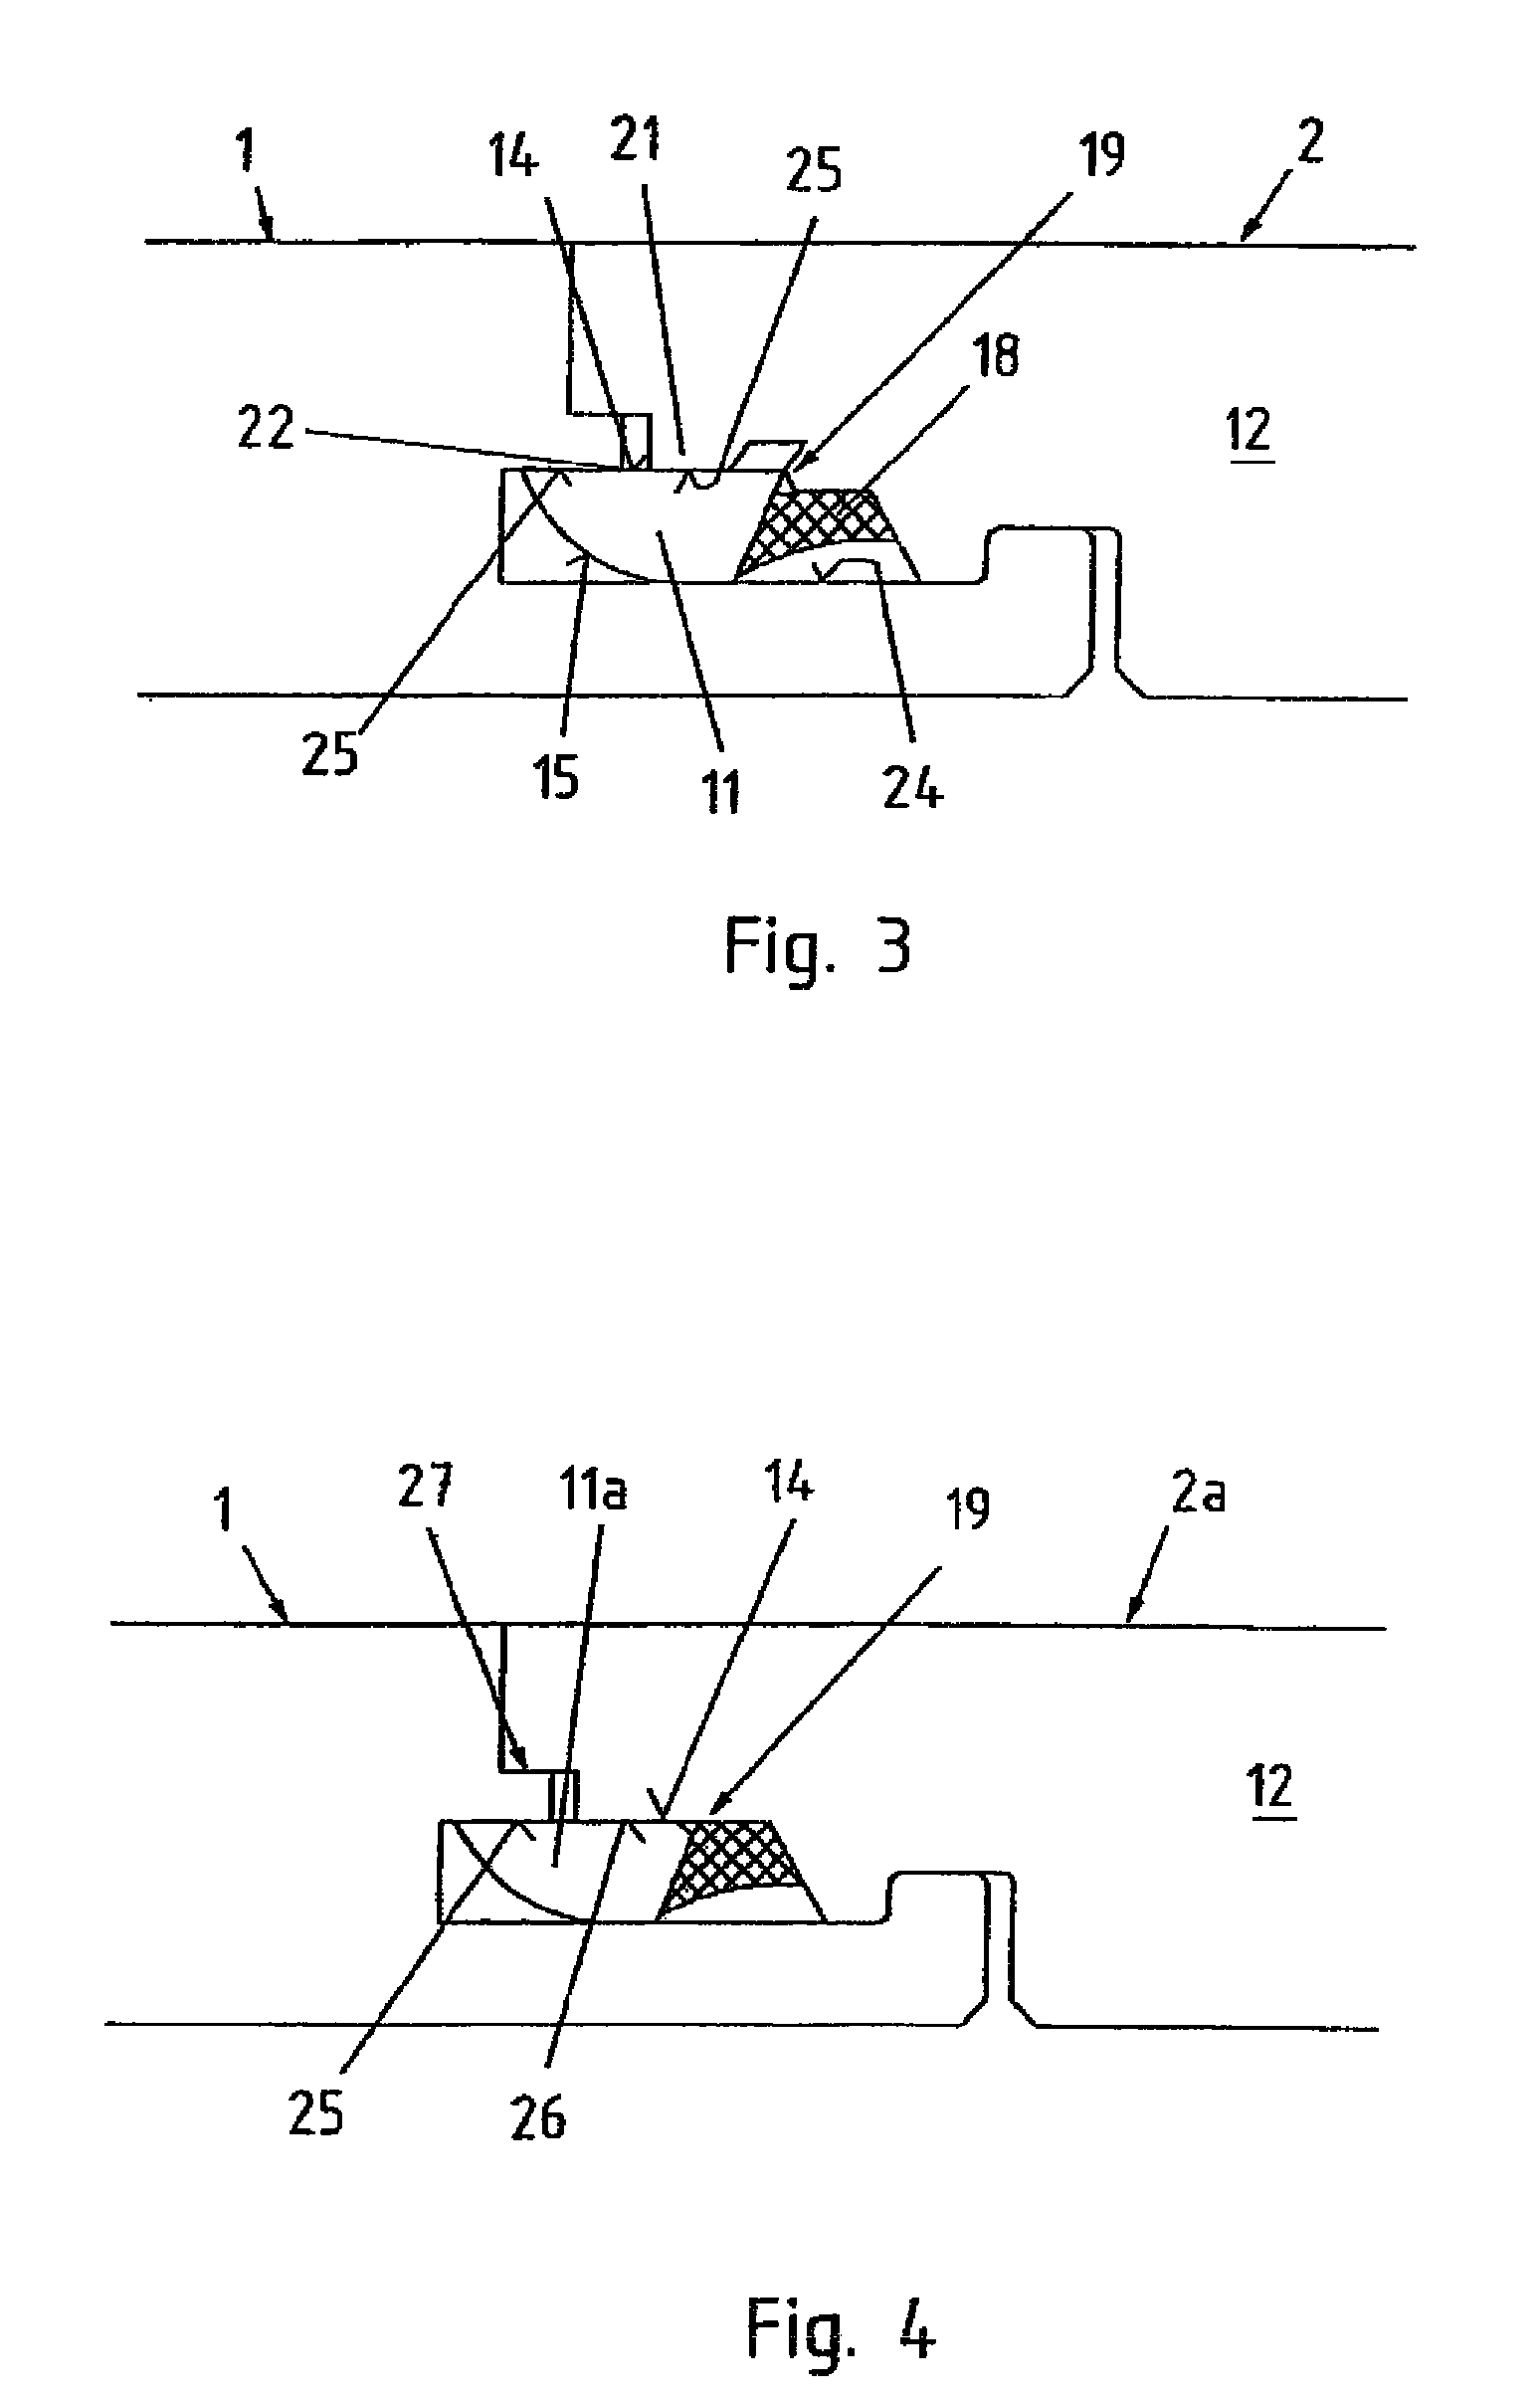 Covering from mechanically interconnectable elements